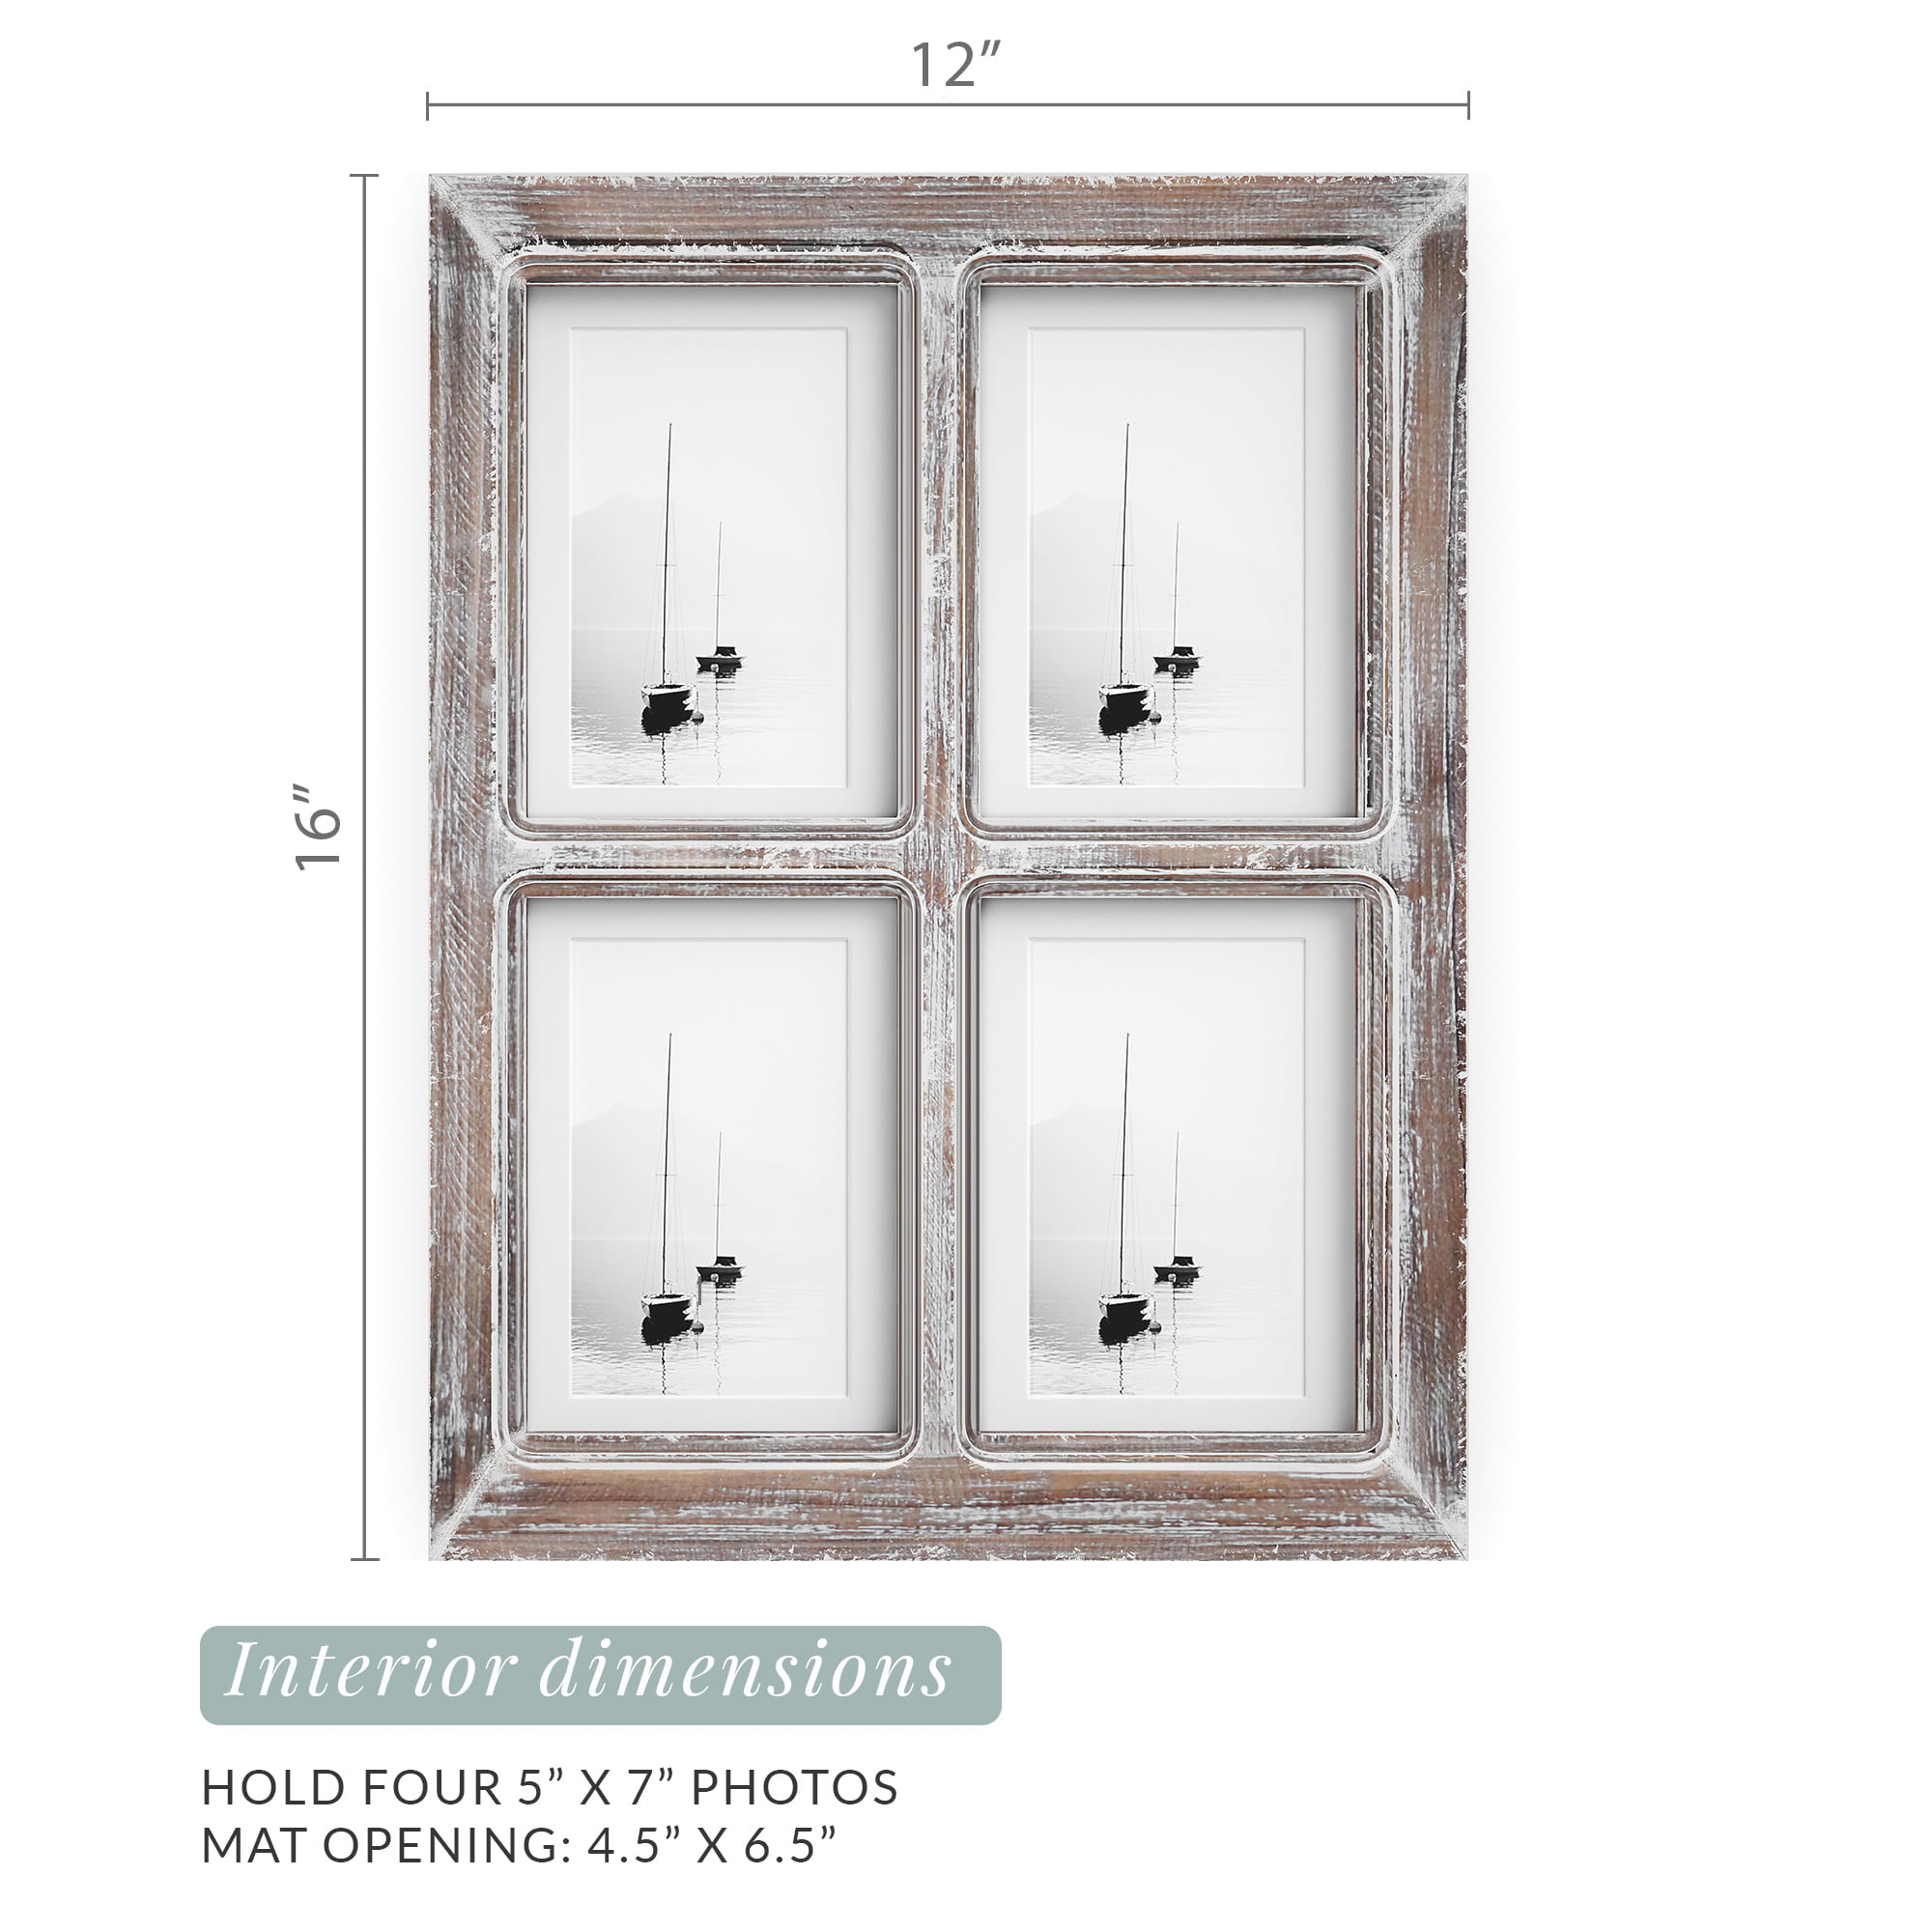 Picture Frame Distressed Farmhouse Wood Pattern 4x6 Set of 4 with Tempered Glass